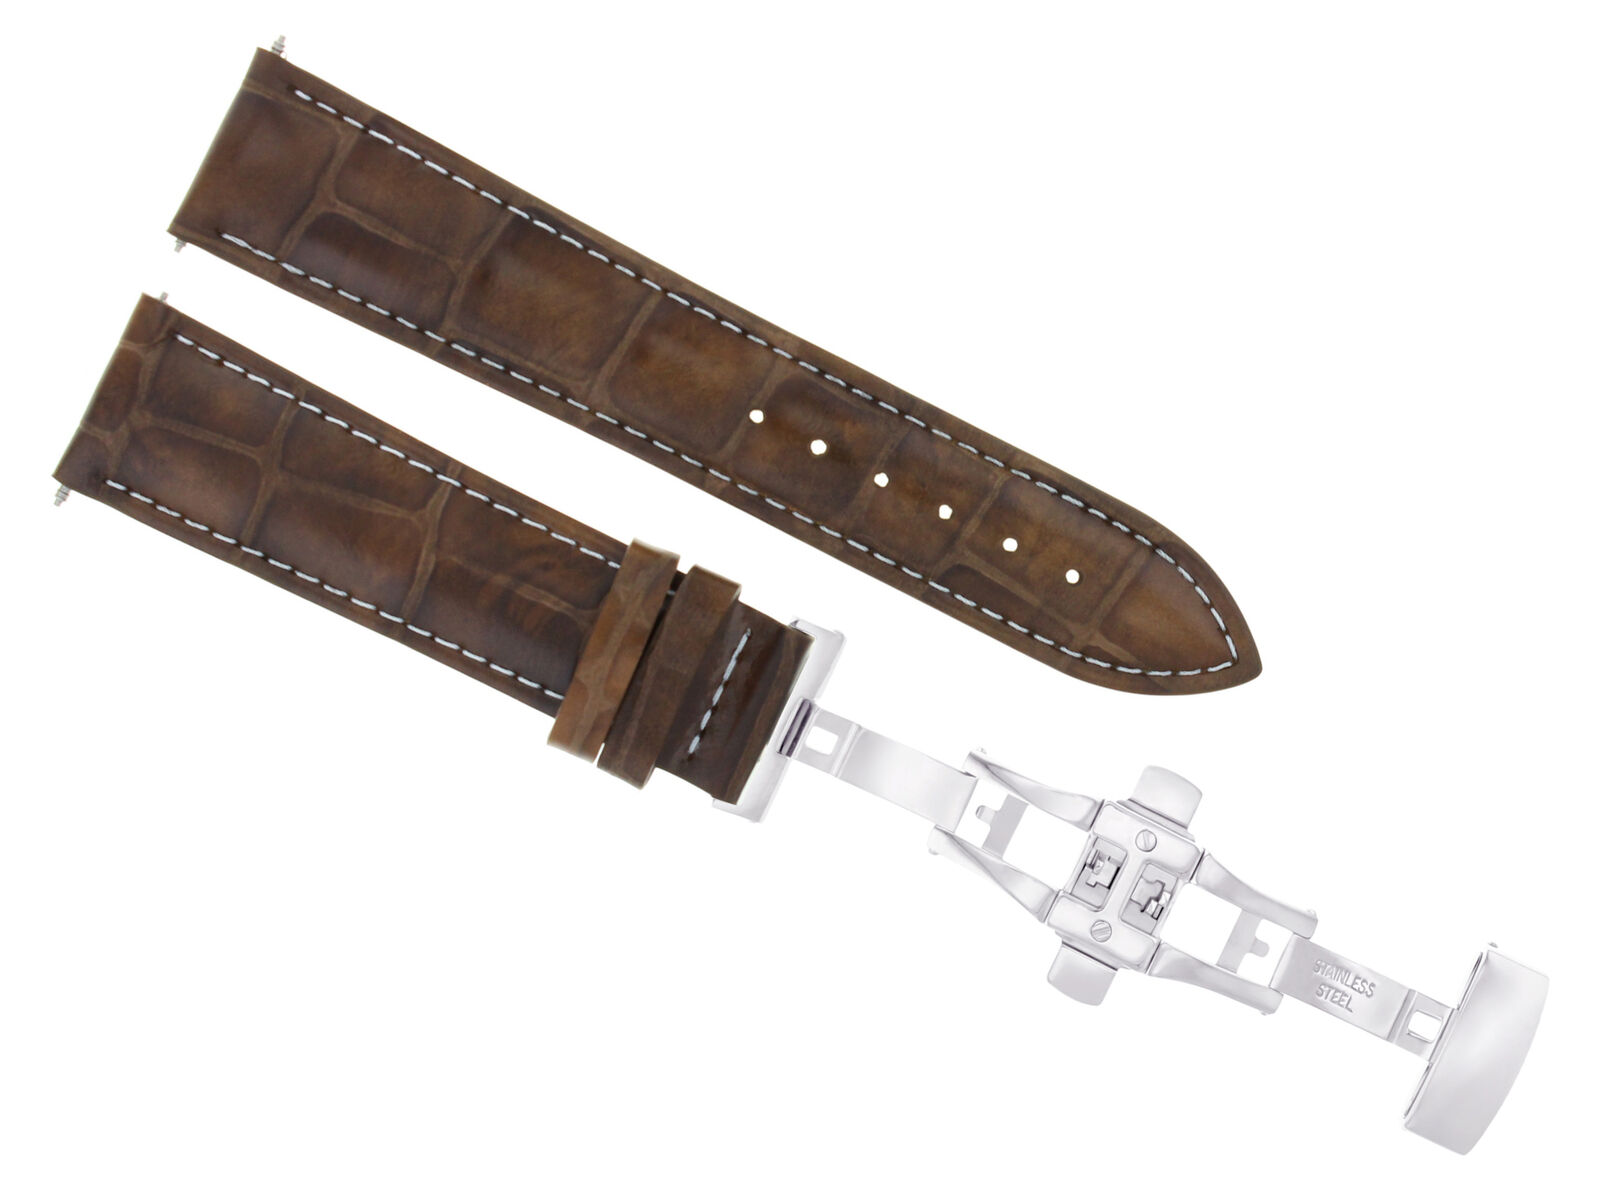 19MM LEATHER STRAP WATCH BAND FOR GUESS WATCH DEPLOYMENT CLASP BUCKLE L/BROWN WS